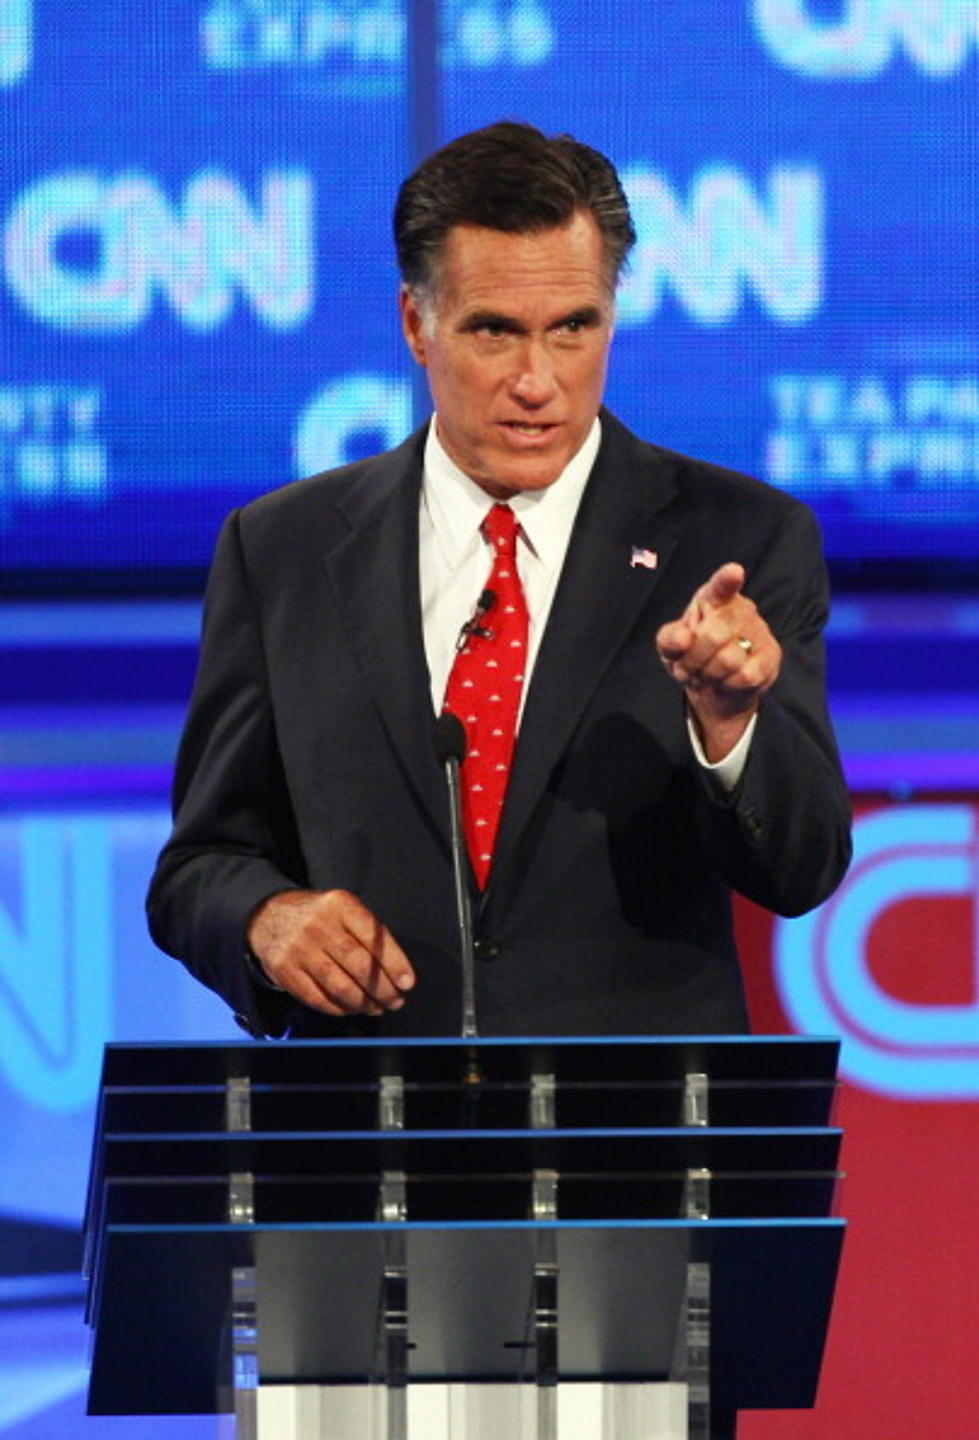 Obama Vacation Scouts, Romney Says to Pack and An Obama Adviser Endorses Romney?